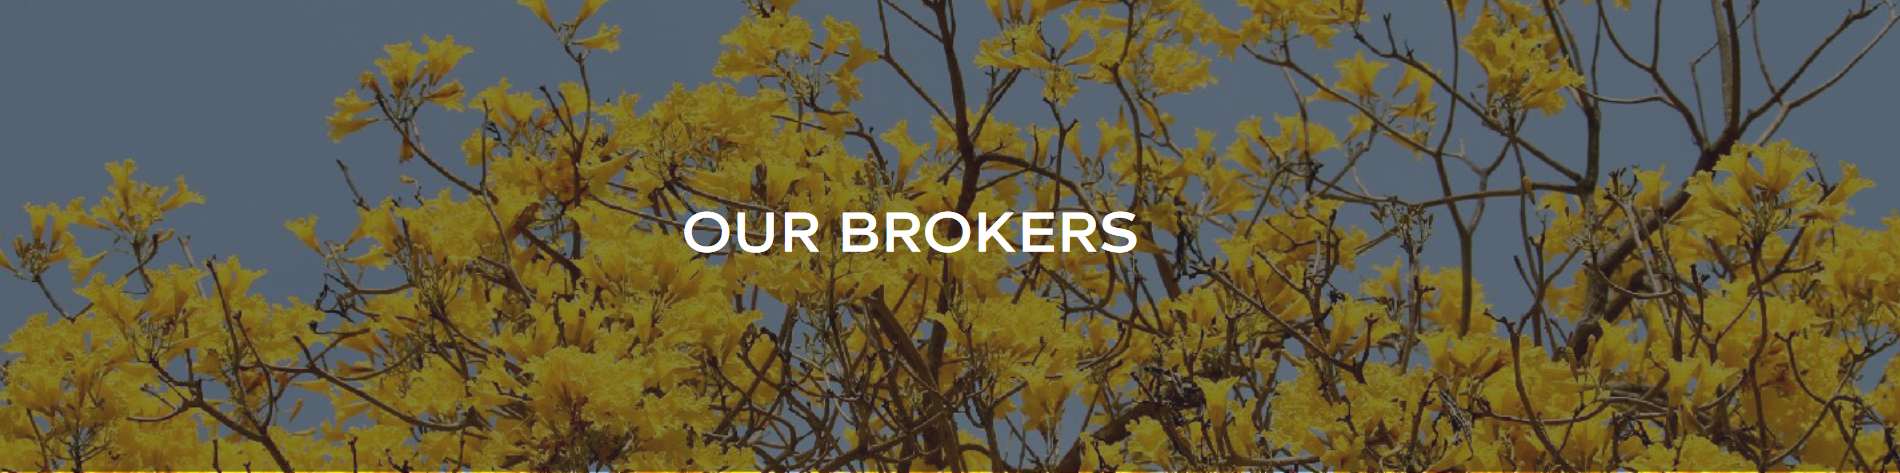 Our Brokers